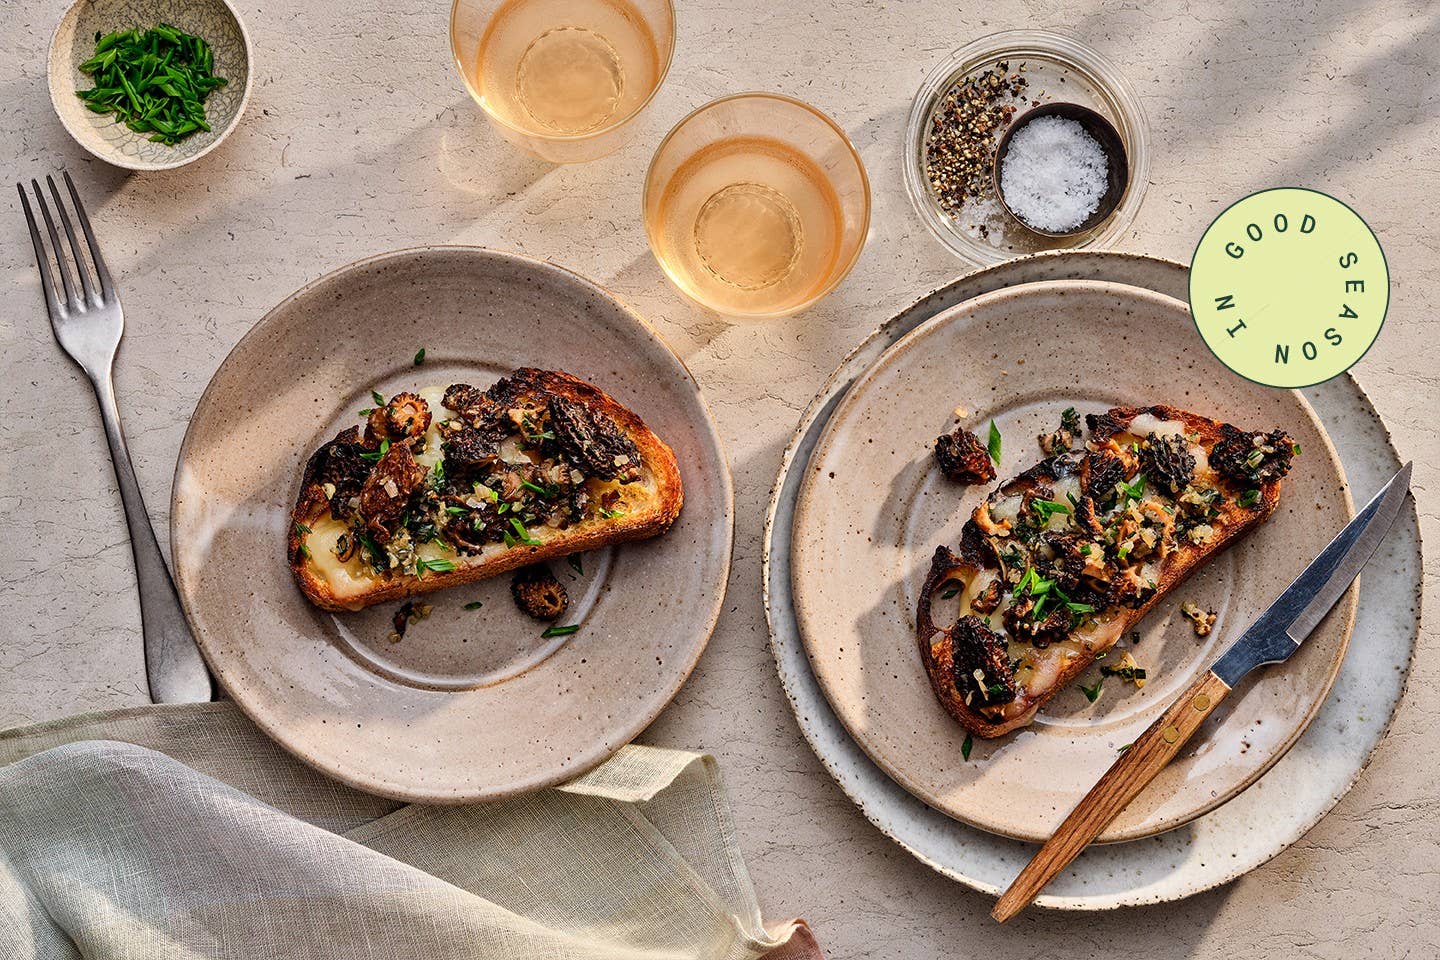 Grilled Morels with Fontina on Toast